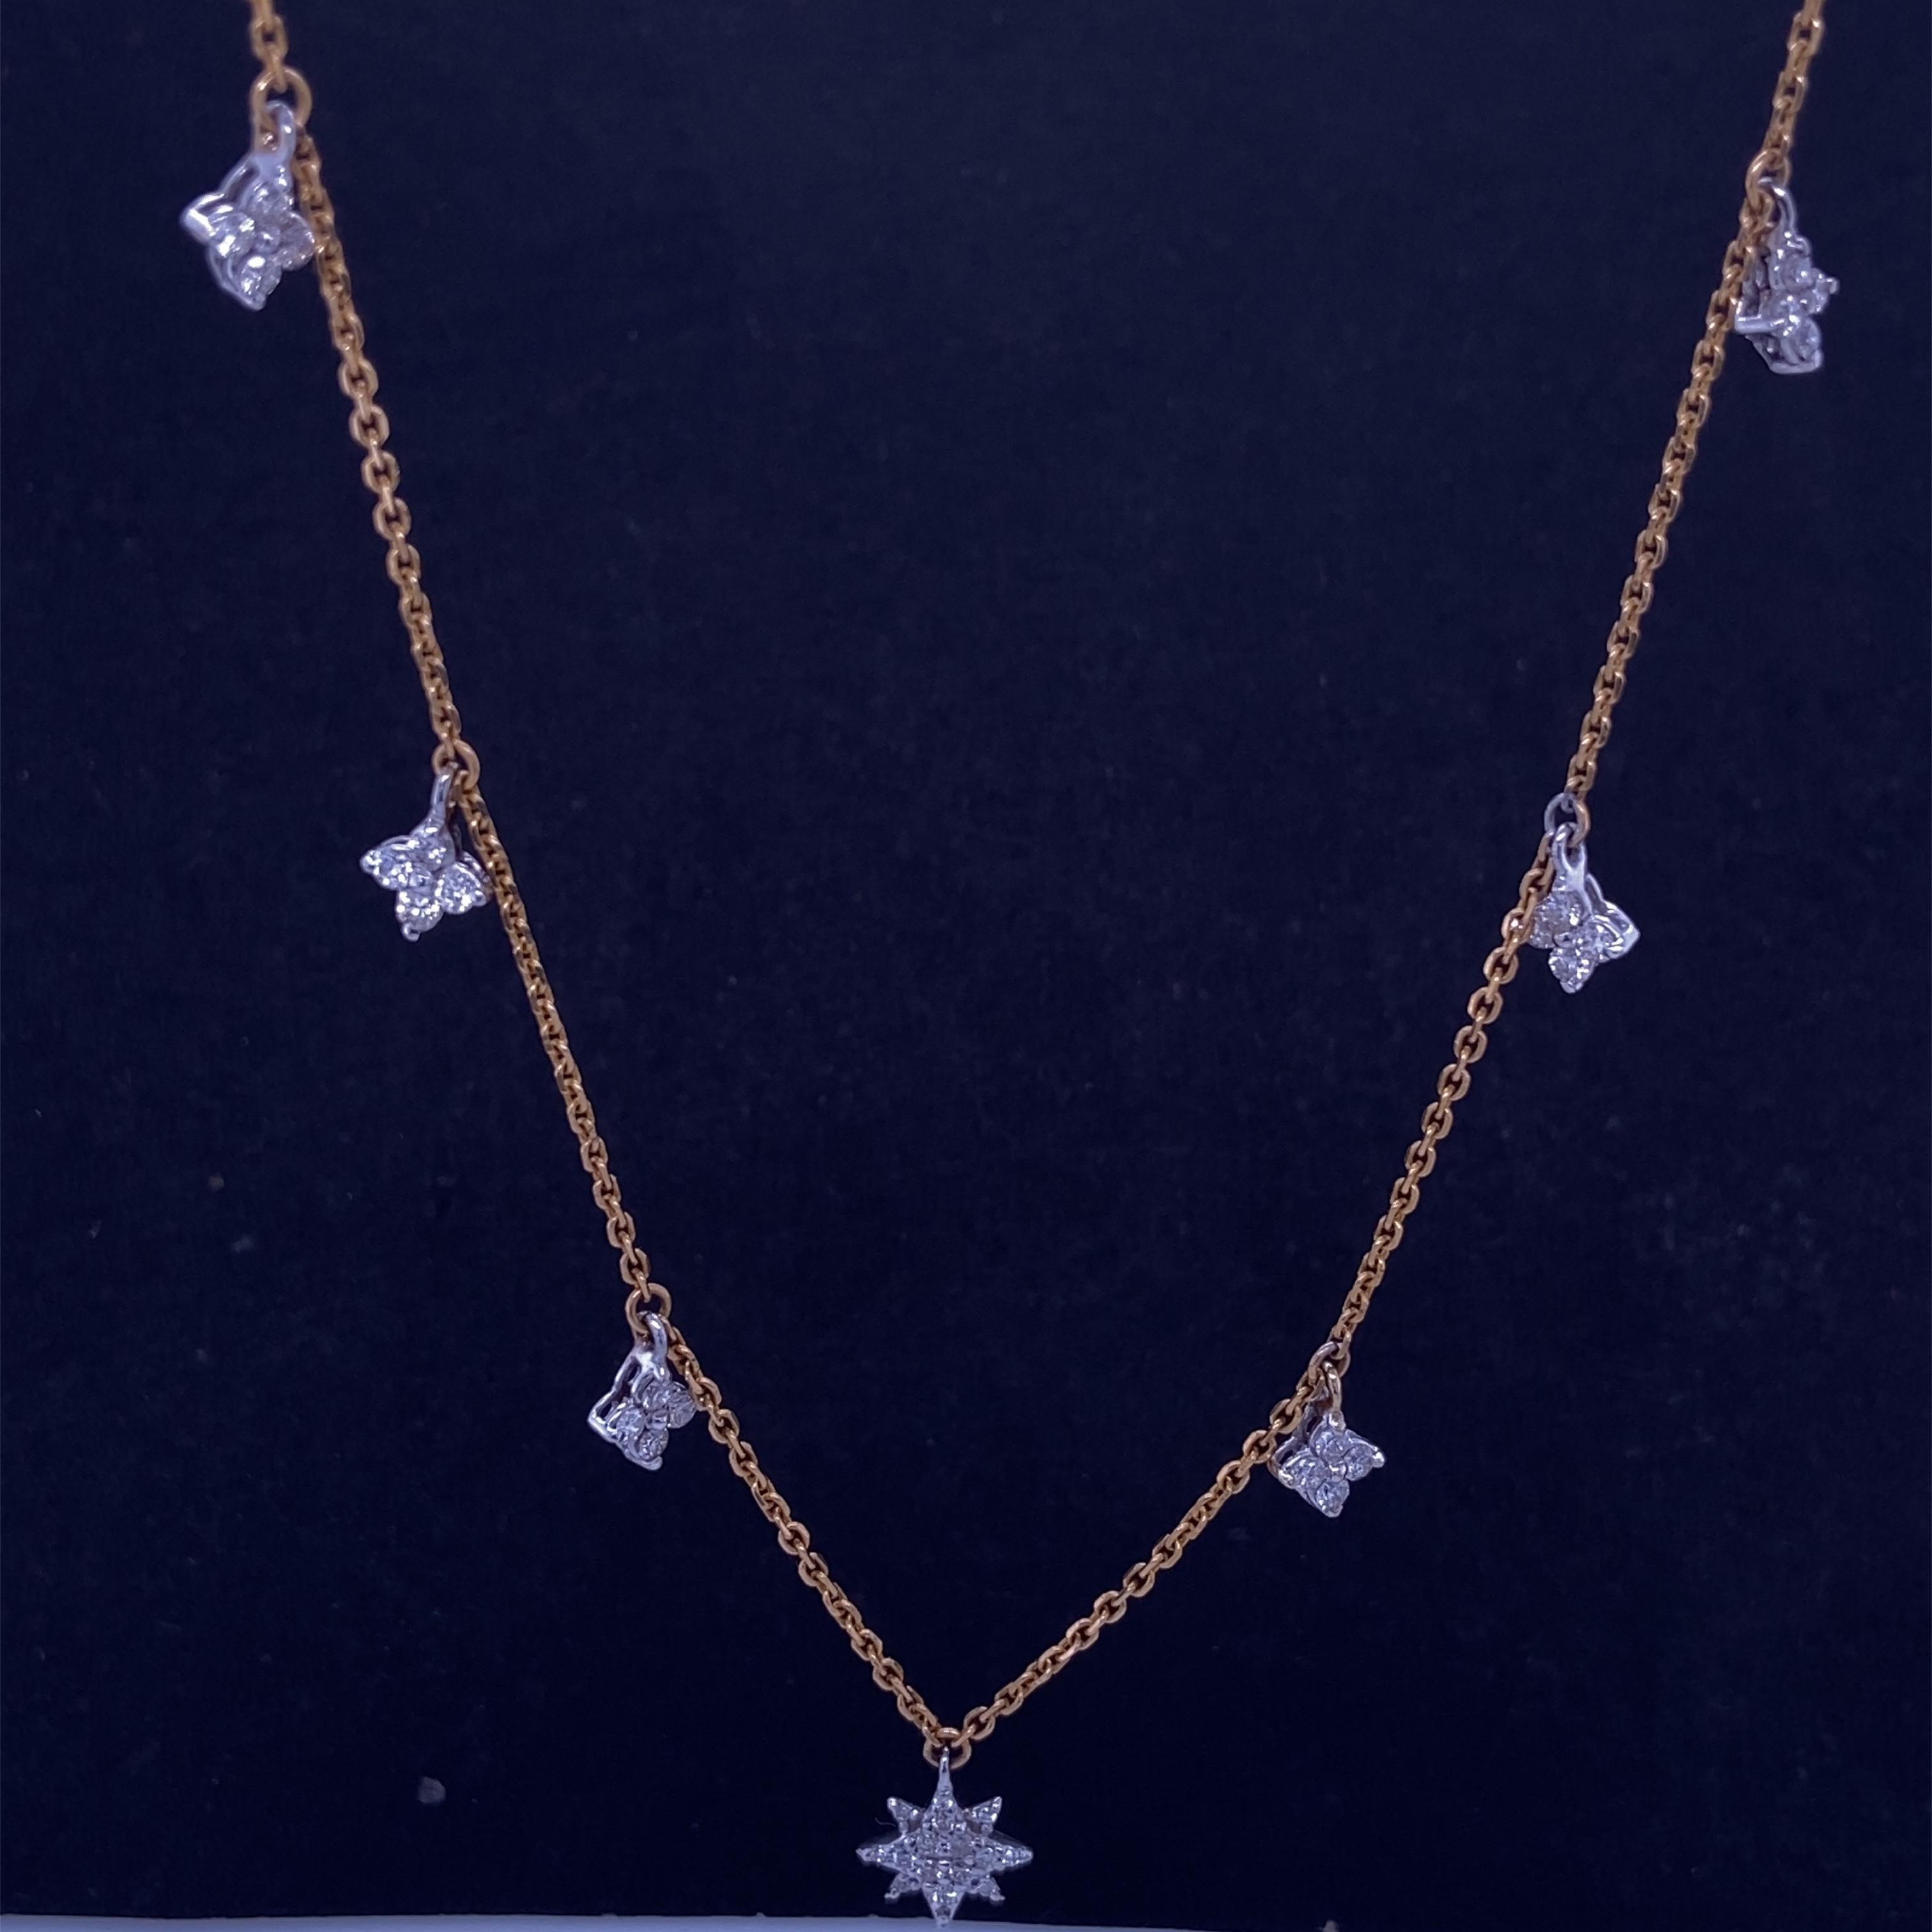 necklace with stars all around